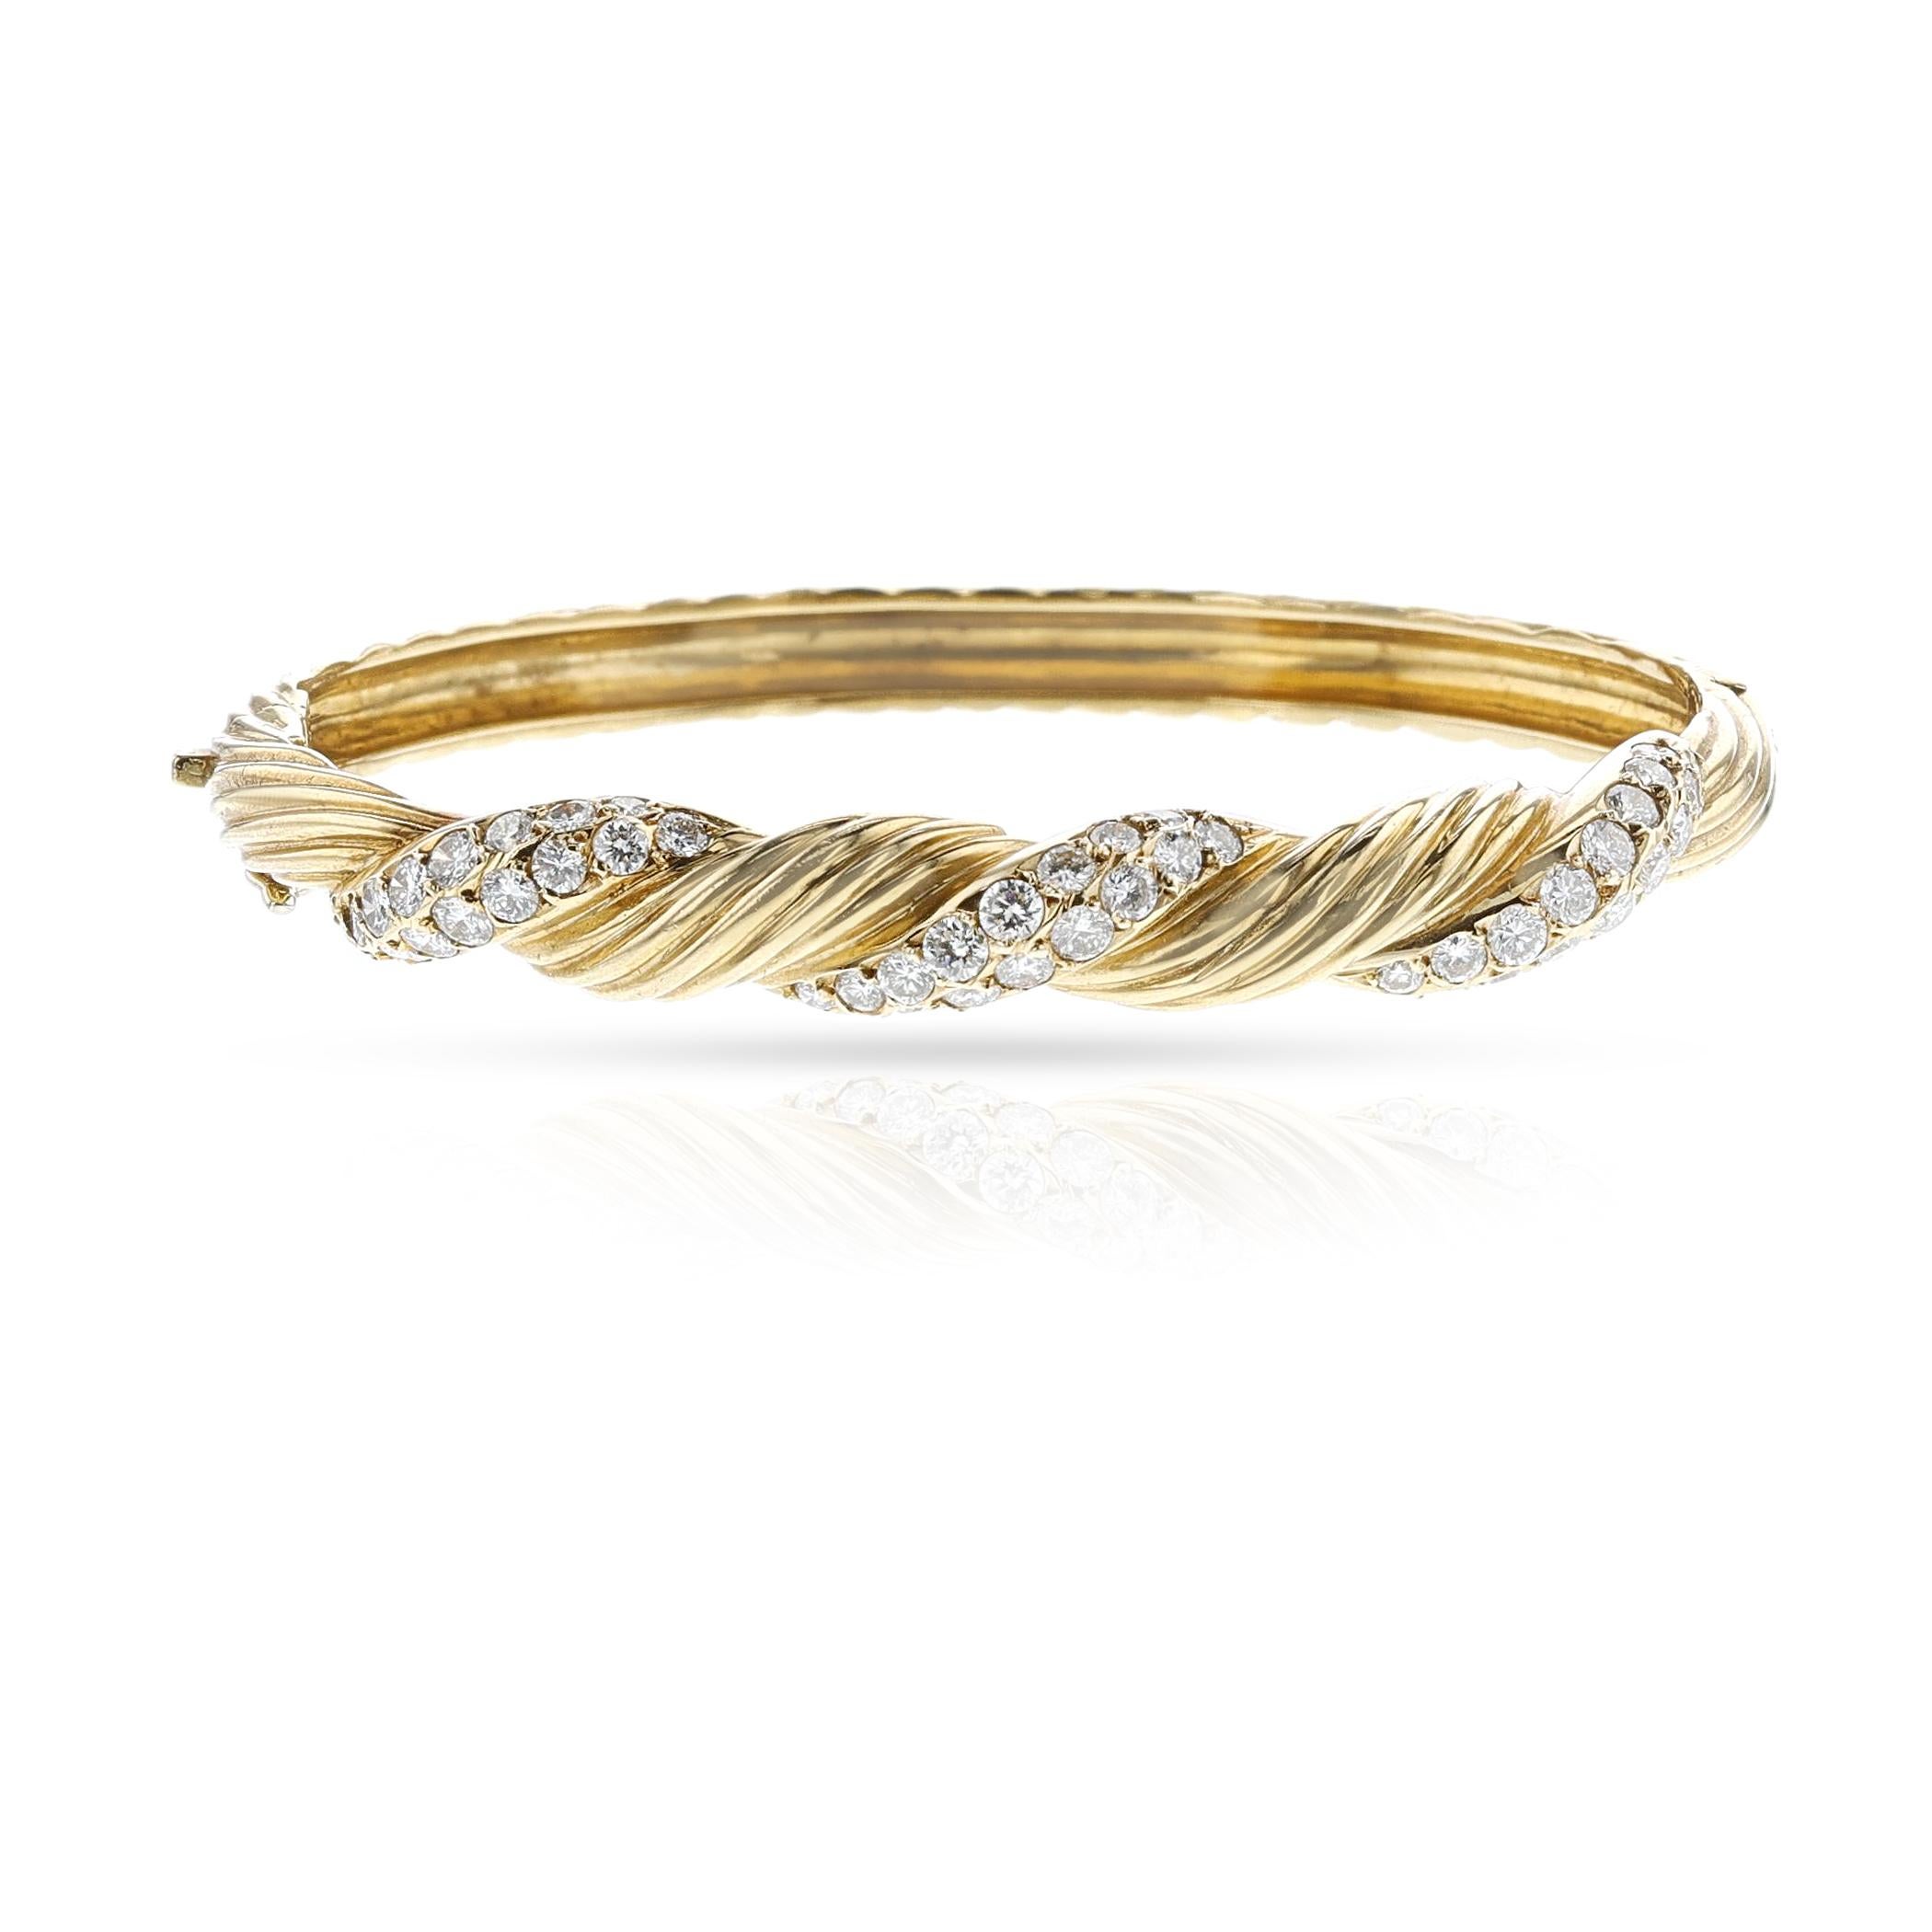 A Van Cleef & Arpels Diamond and Gold Bangle made in 18k Gold. The length is 6.3 inches. The weight of the bangle is 22.37 grams. Signed and numbered. Jeweler's Hallmark: Richard Wildenstein.

SKU: 1459-DAJATP